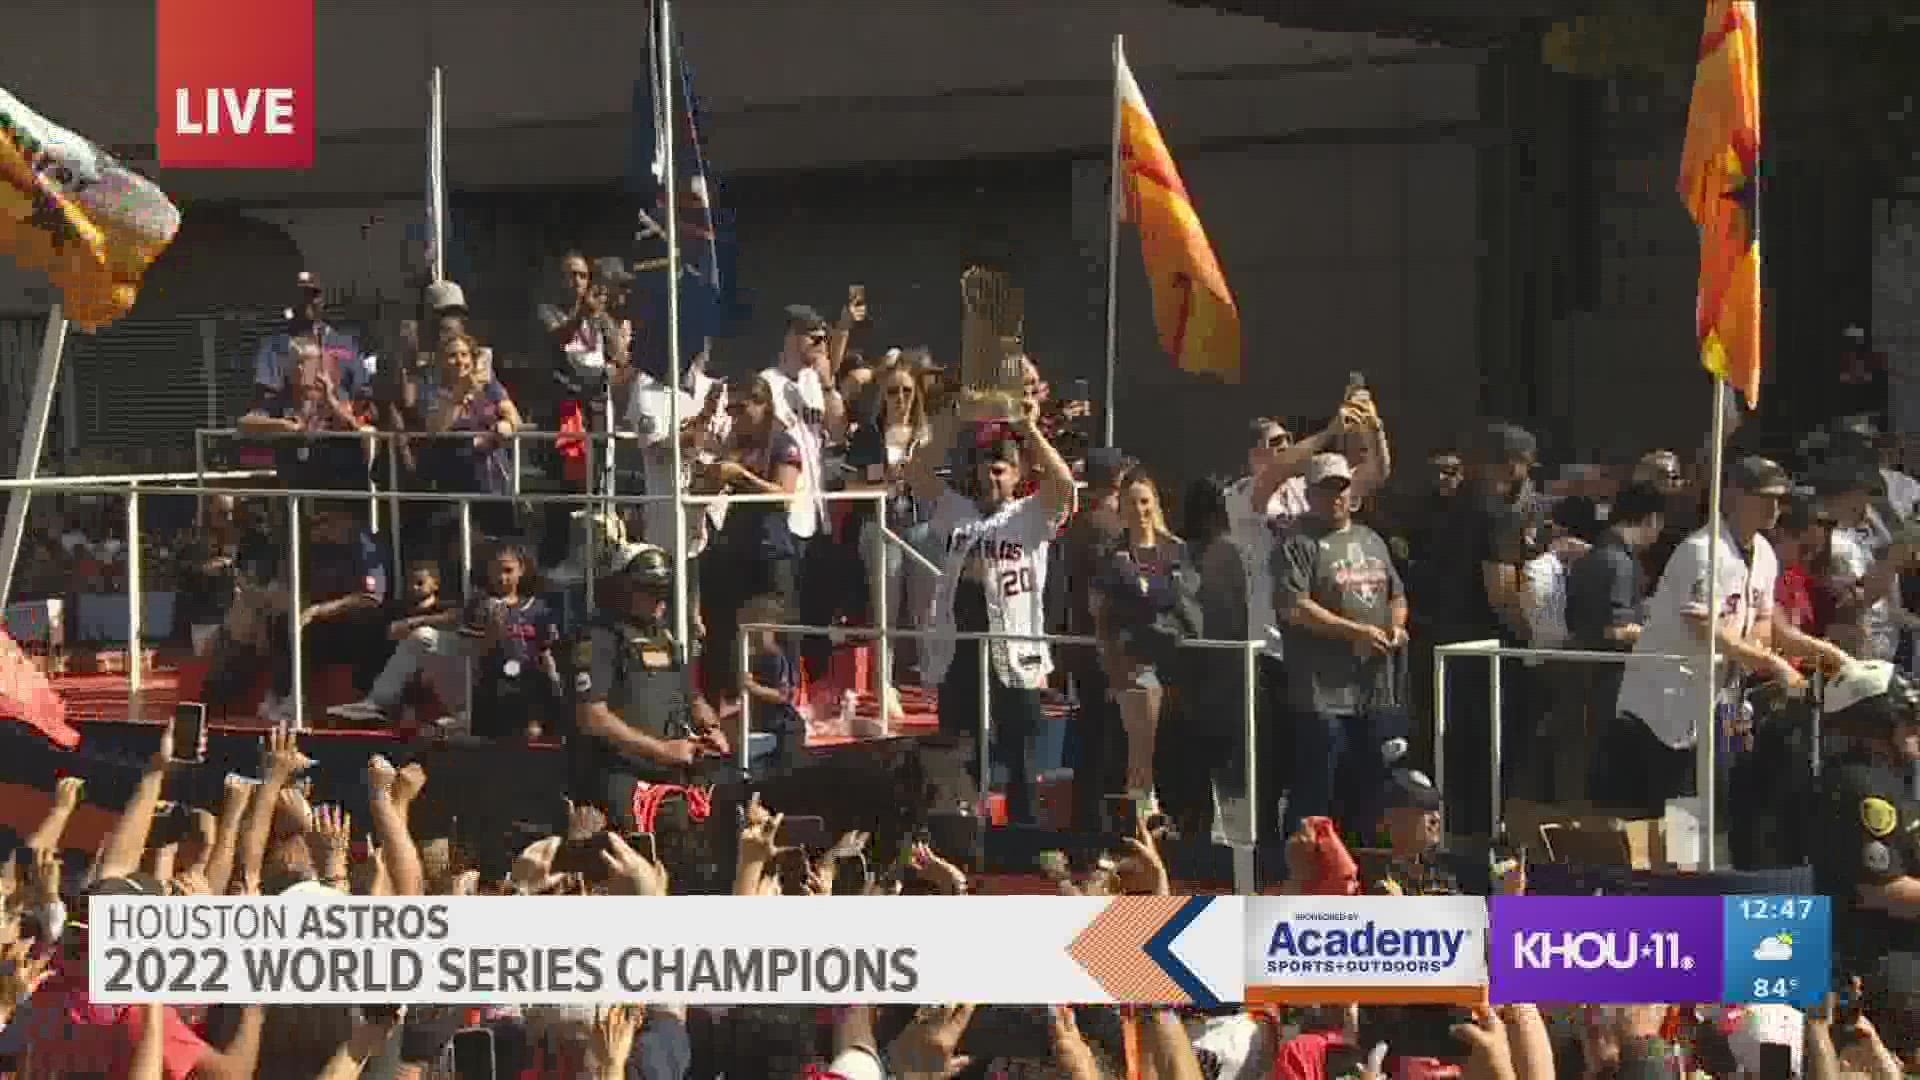 Astros championship banner ceremony: Fans get loud for unveiling